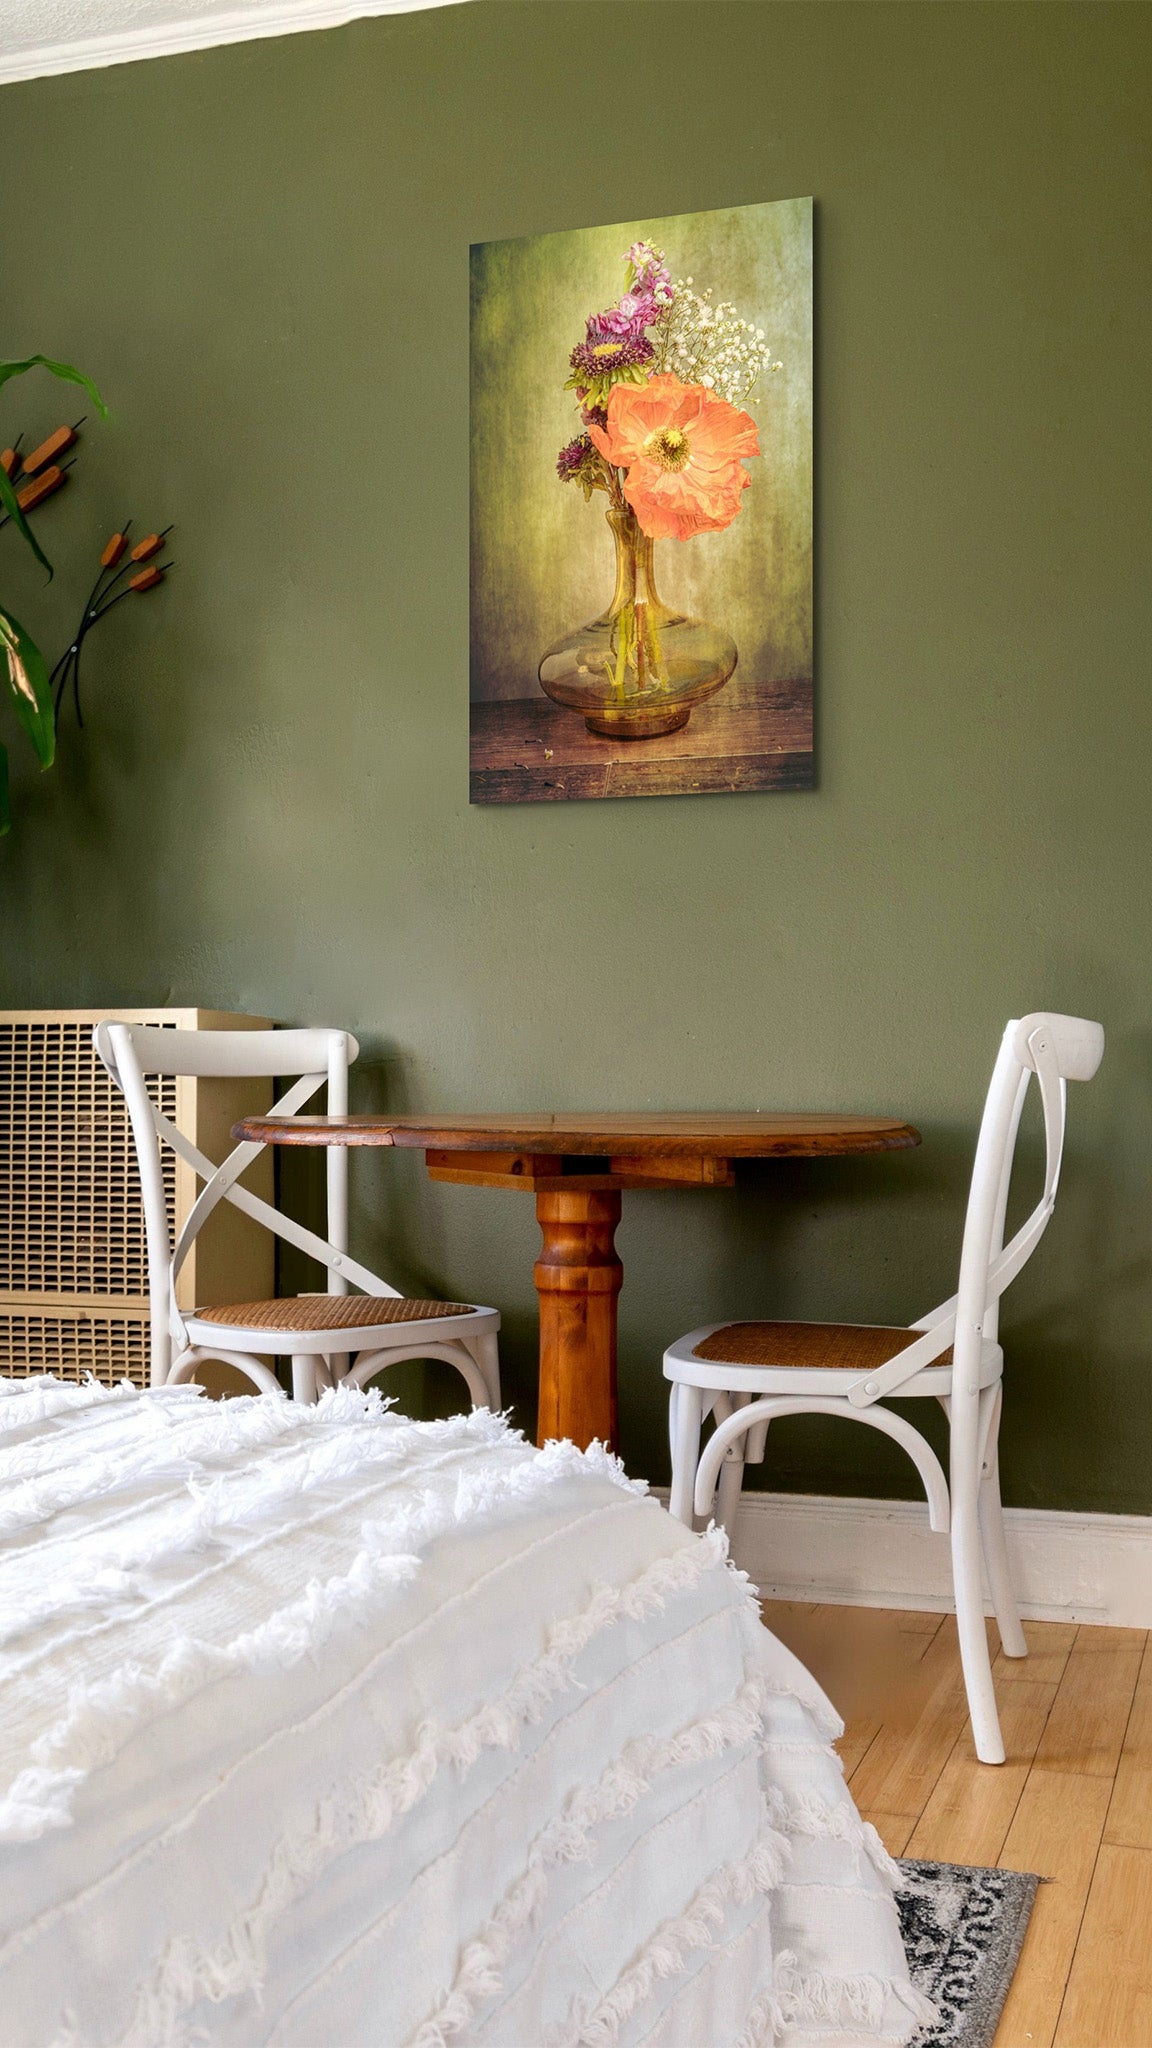 Picture hanging on the wall of a bedroom. The picture is a fine art flower photograph of a bouquet with an orange Icelandic poppy titled "Speakeasy" by Cameron Dreaux of Dreaux Fine Art.